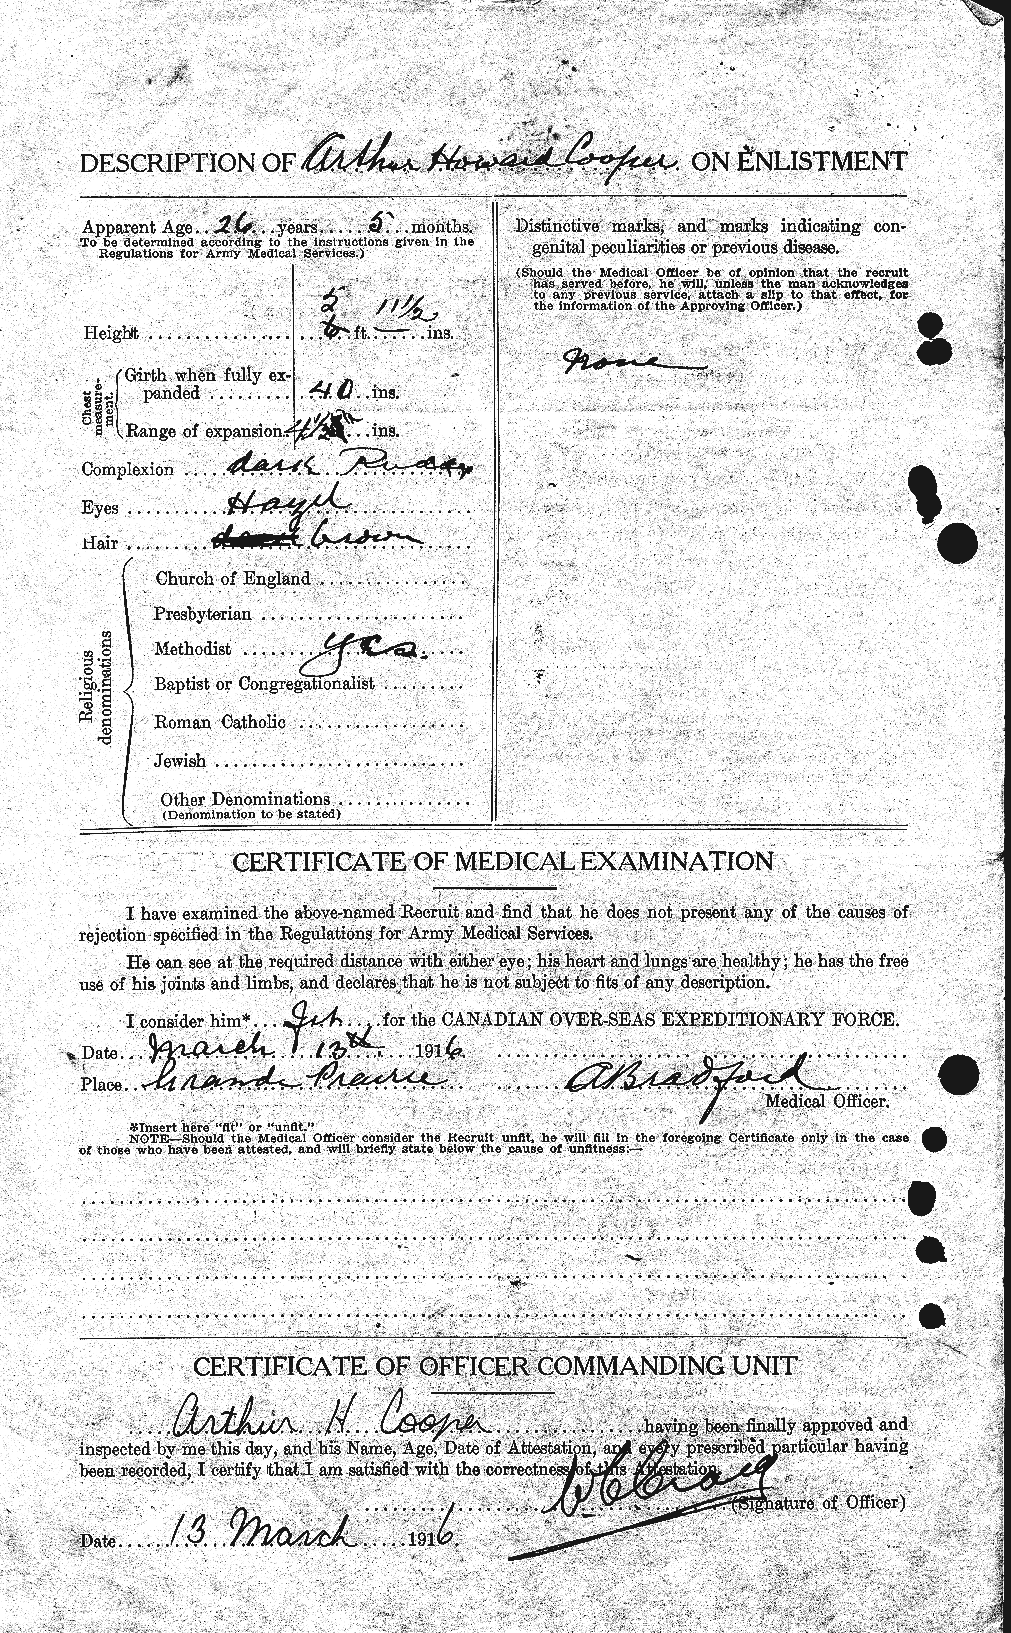 Personnel Records of the First World War - CEF 054364b